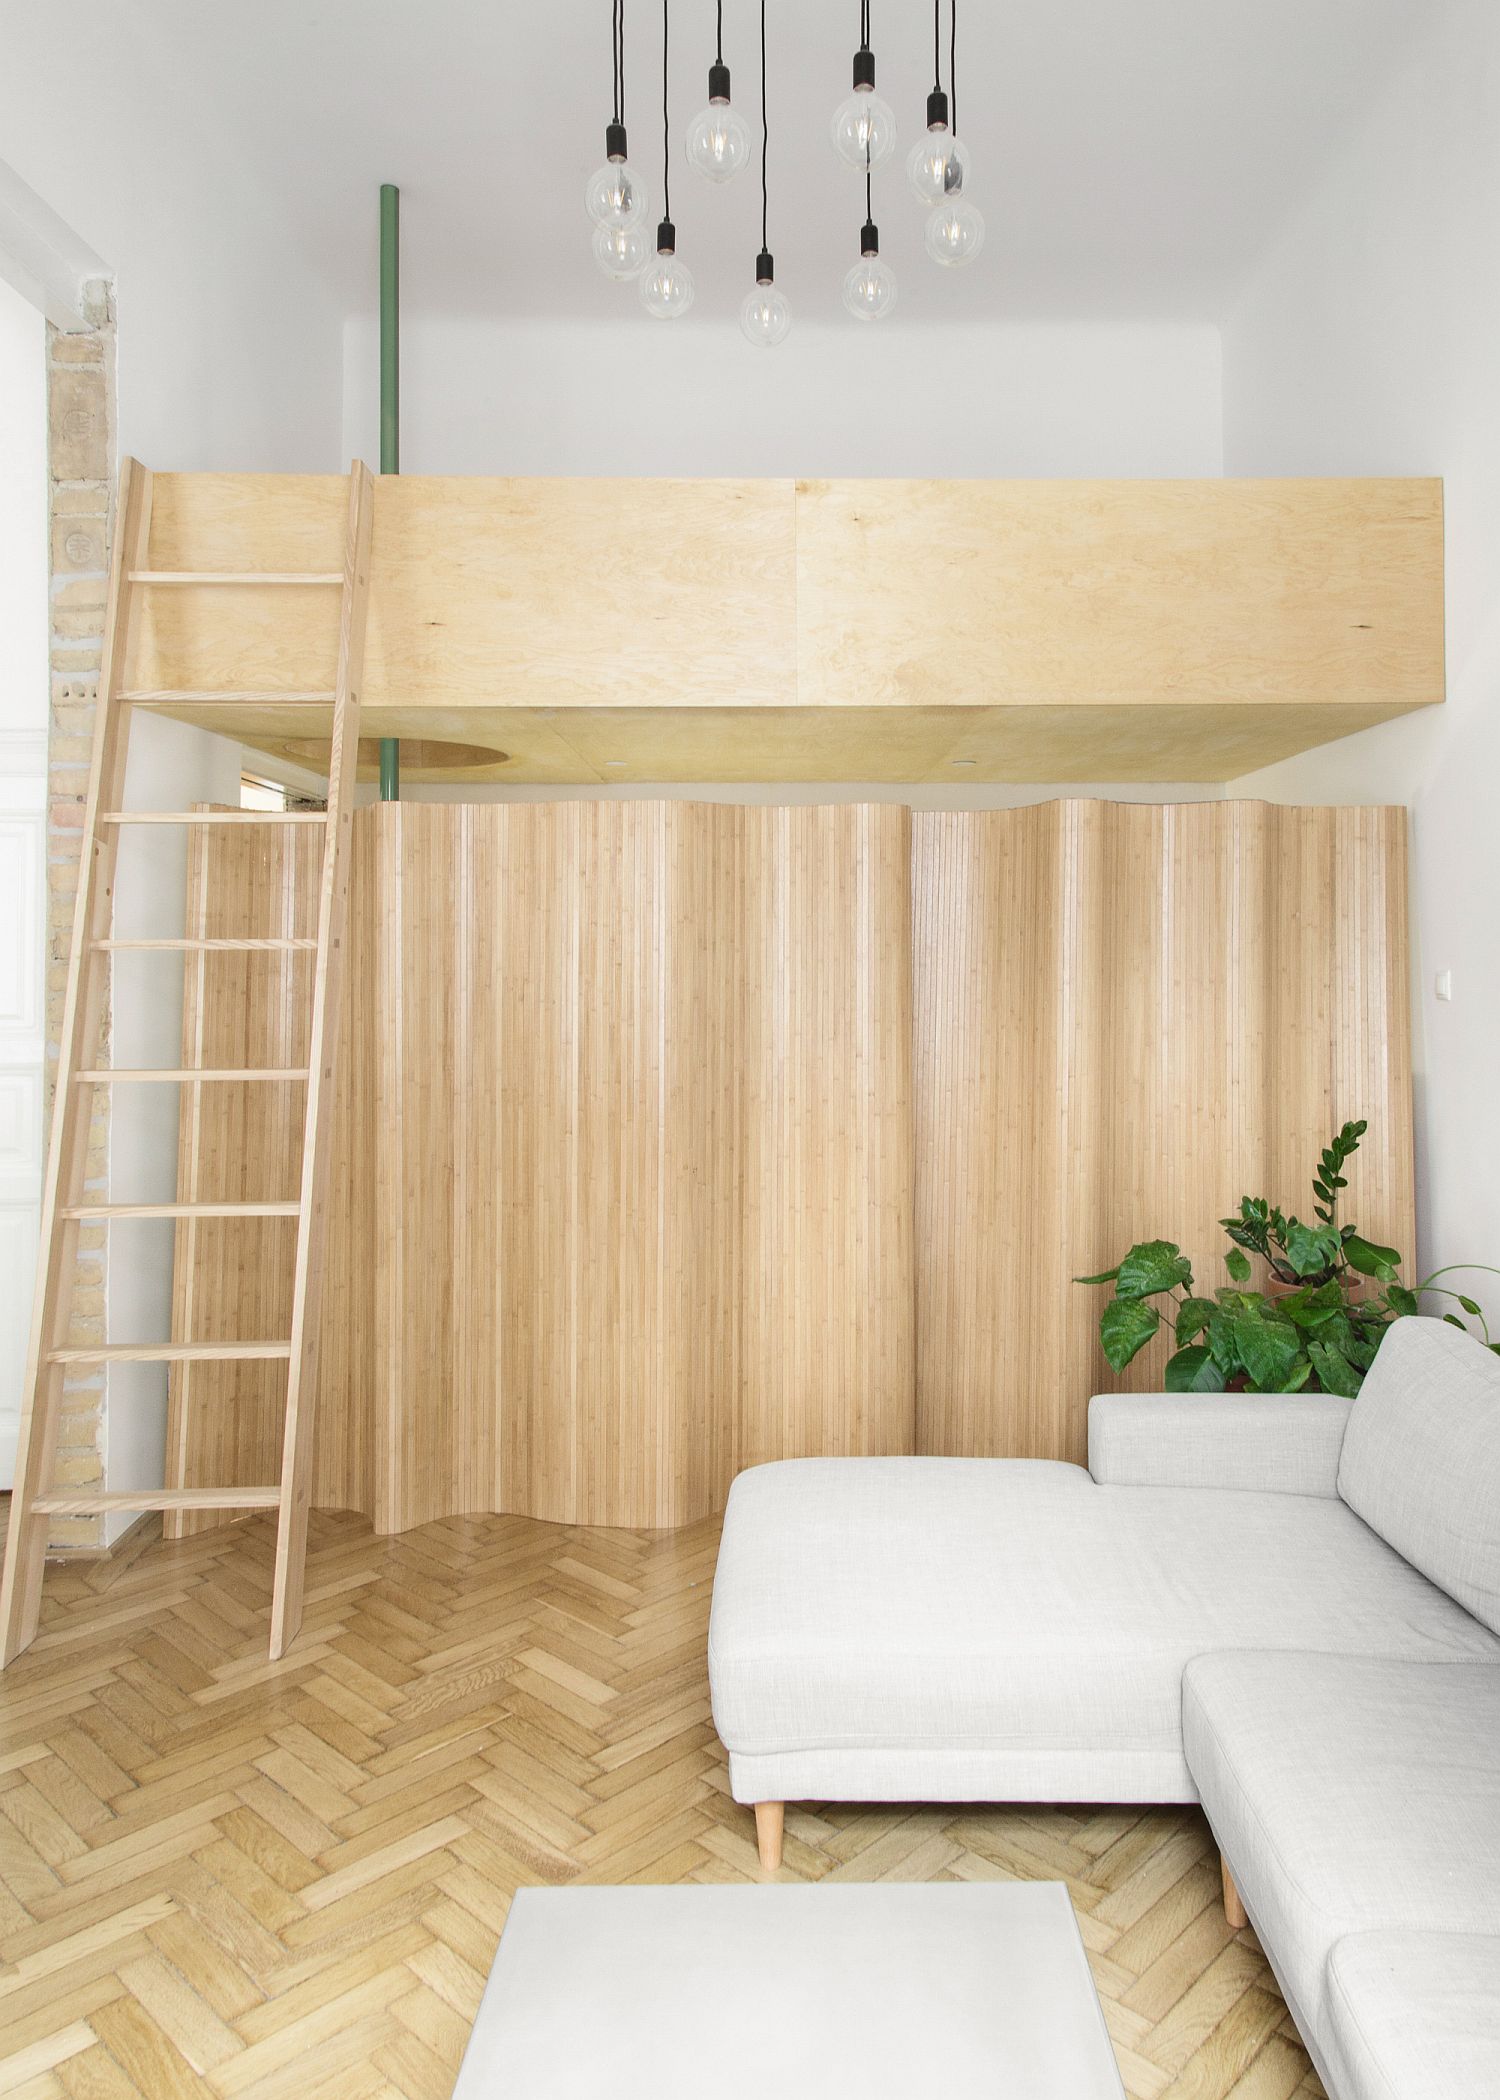 Ladders and wooden finishes give the apartment a spacious and stylish look